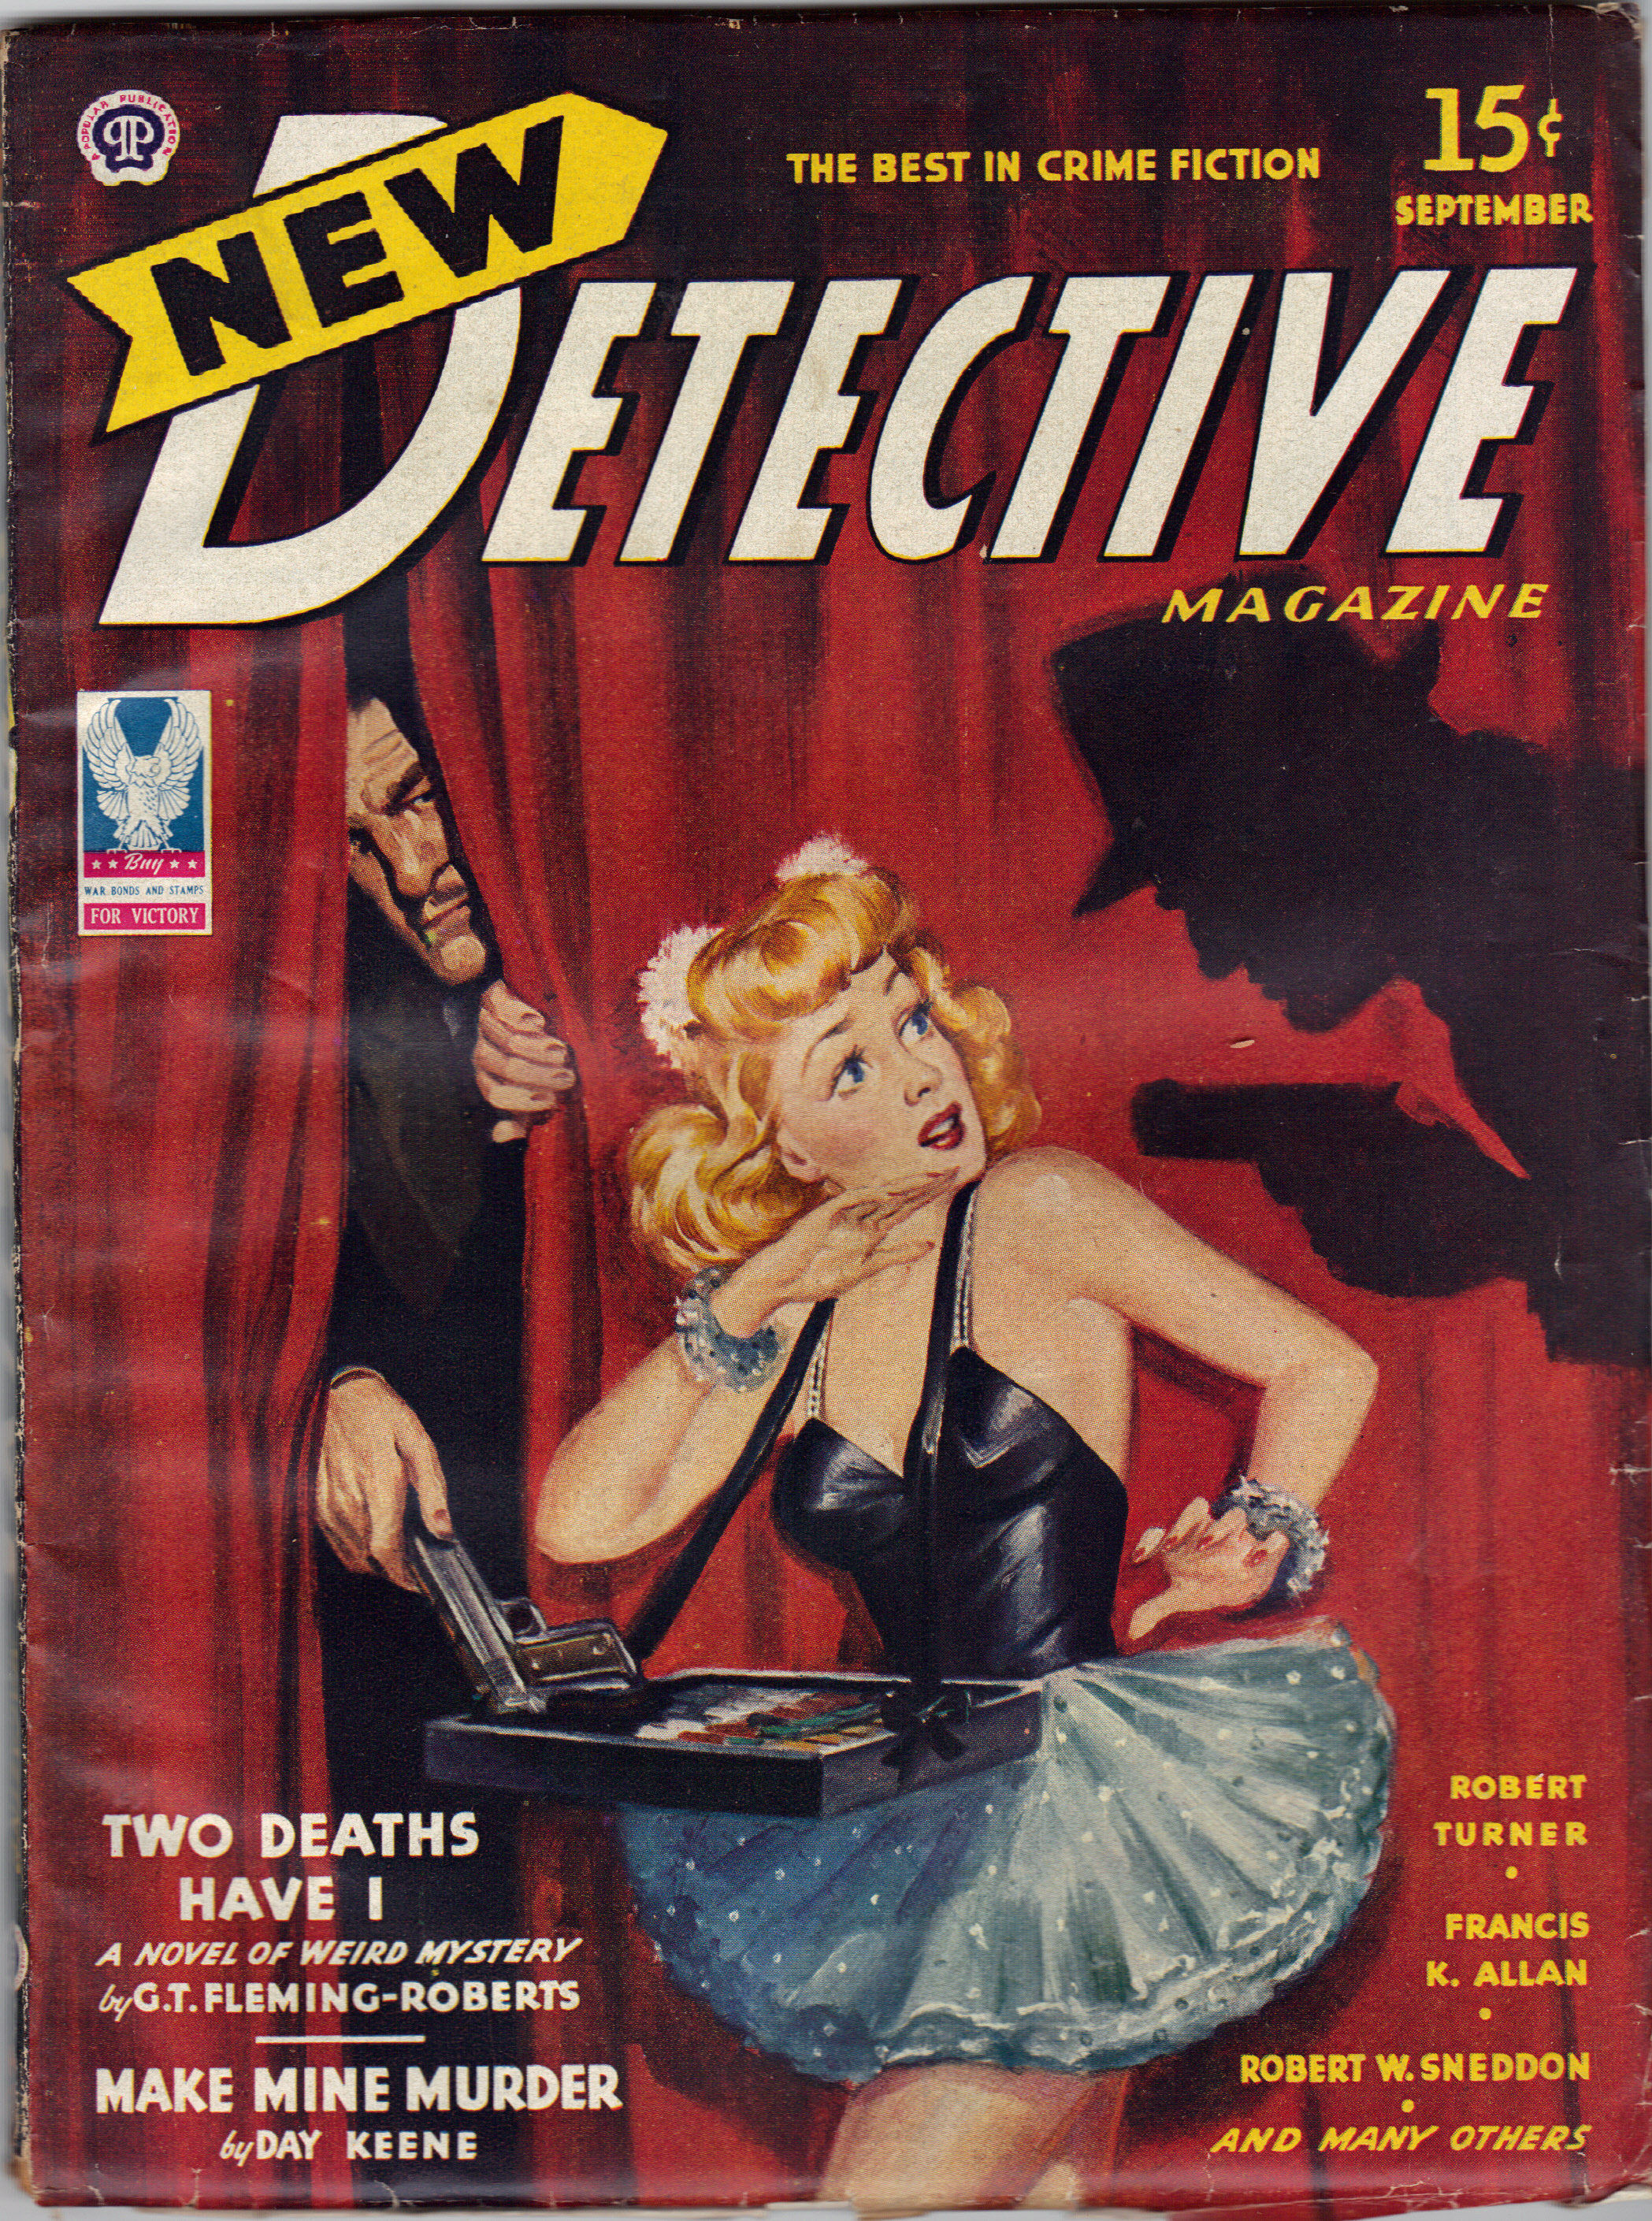 Vintage Detective Magazine Covers crotchless panty